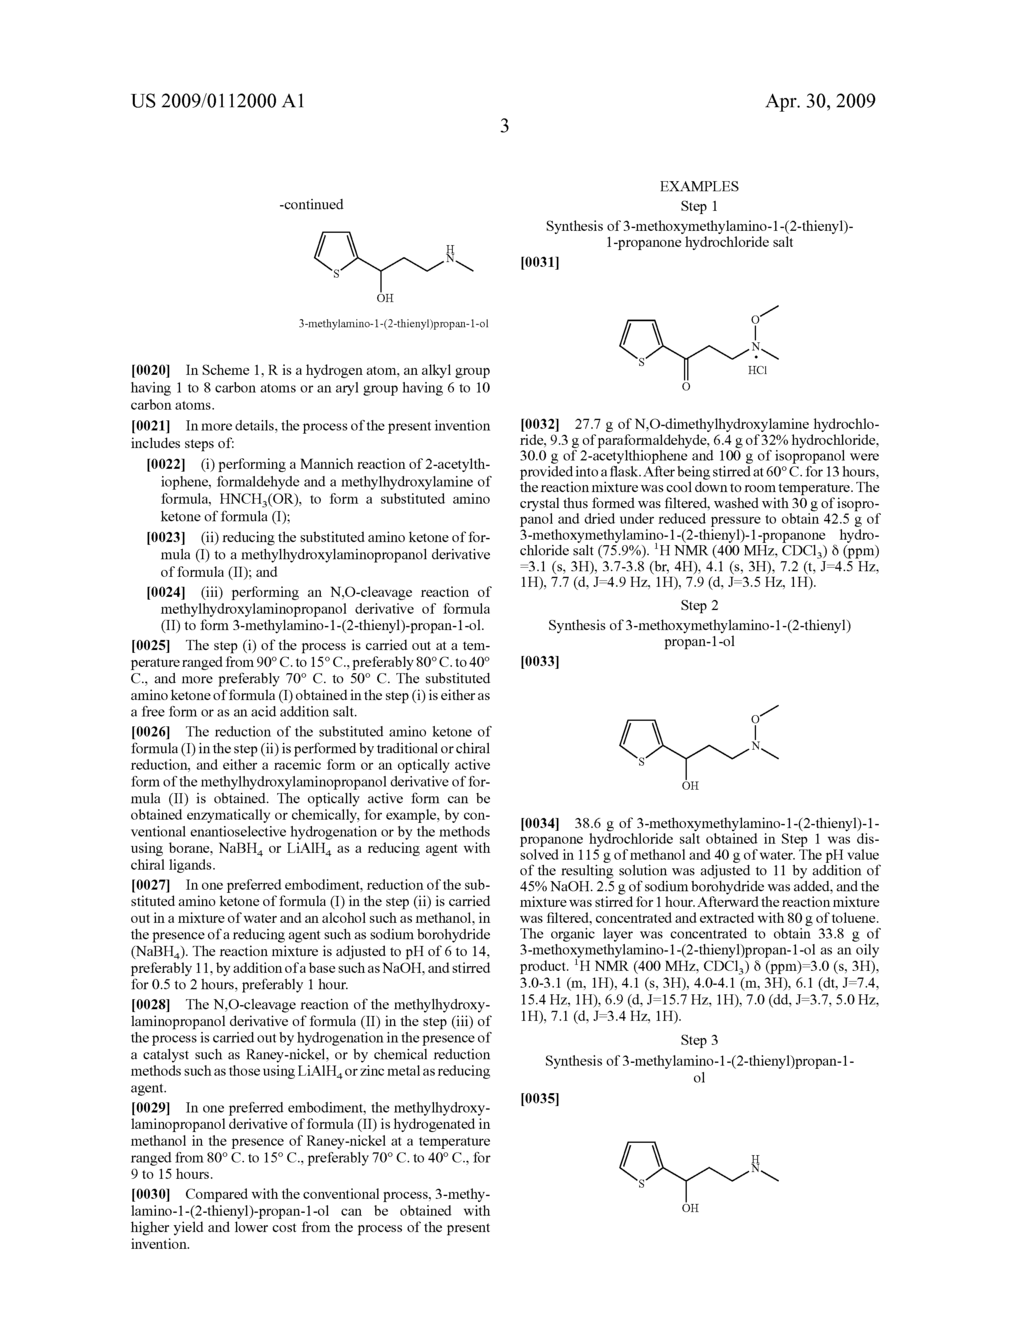 METHYLHYDROXYLAMINOPROPANOL DERIVATIVE AND ITS USE AS INTERMEDIATE FOR PREPARATION OF 3-METHYLAMINO-1-(2-THIENYL)PROPAN-1-OL - diagram, schematic, and image 04